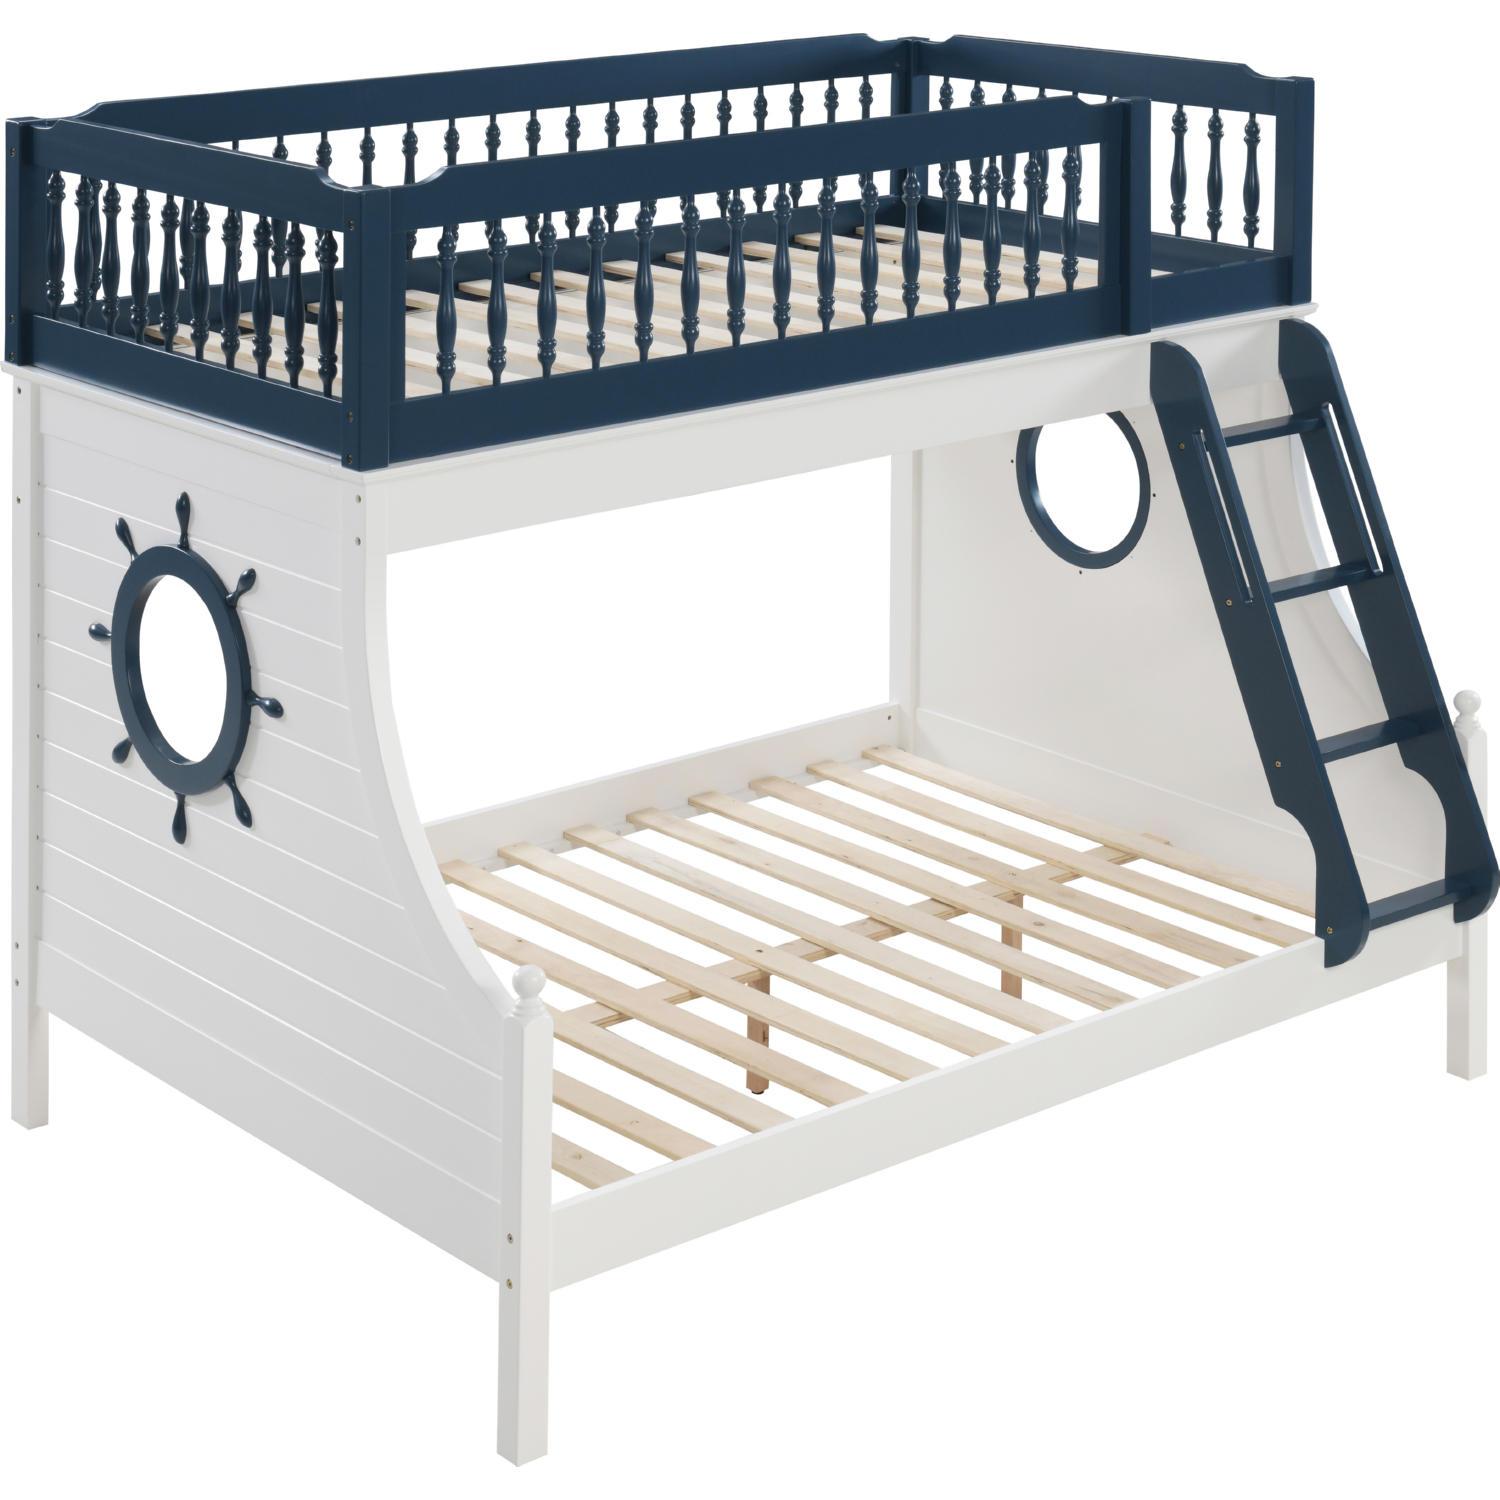 

    
Sailor Style Blue & White Twin/Full Bunk Bed by Acme Farah BD00864
